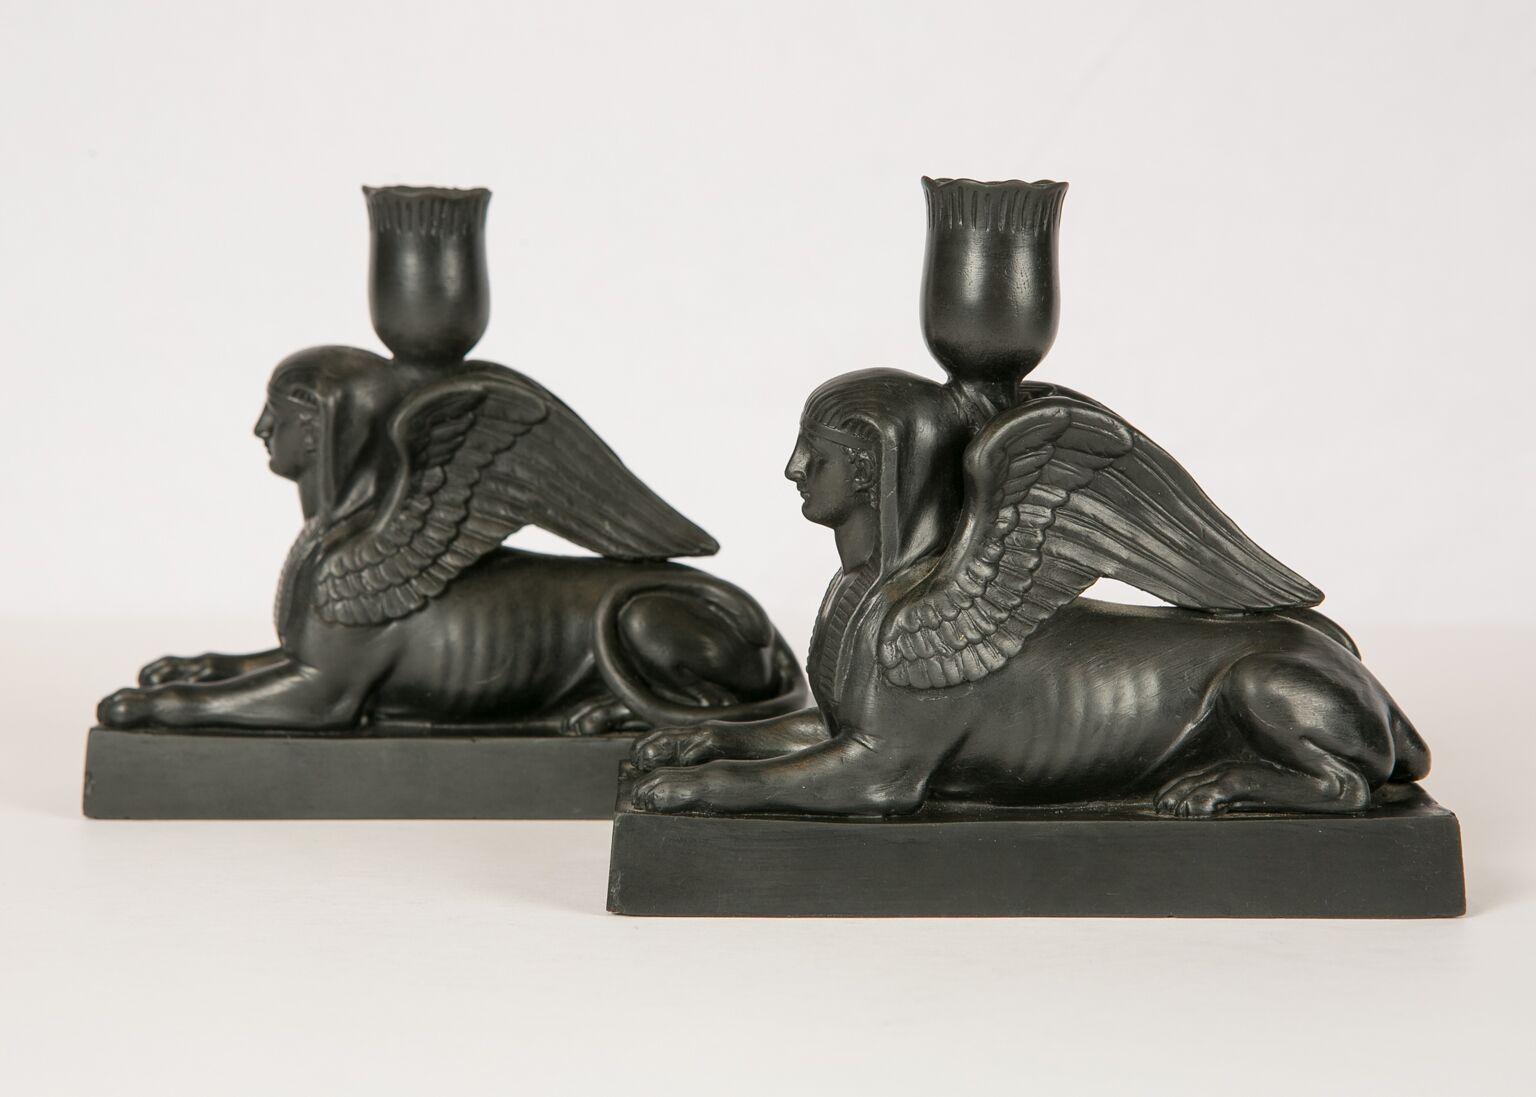 WHY WE LOVE IT: The beauty and strength of woman
A Sphinx has the head of a woman, the body of a lion, and a pair of wings. This pair of Wedgwood black basalt sphinxes, are modeled on a rectangular base with a 'lotus' shaped candleholder. The